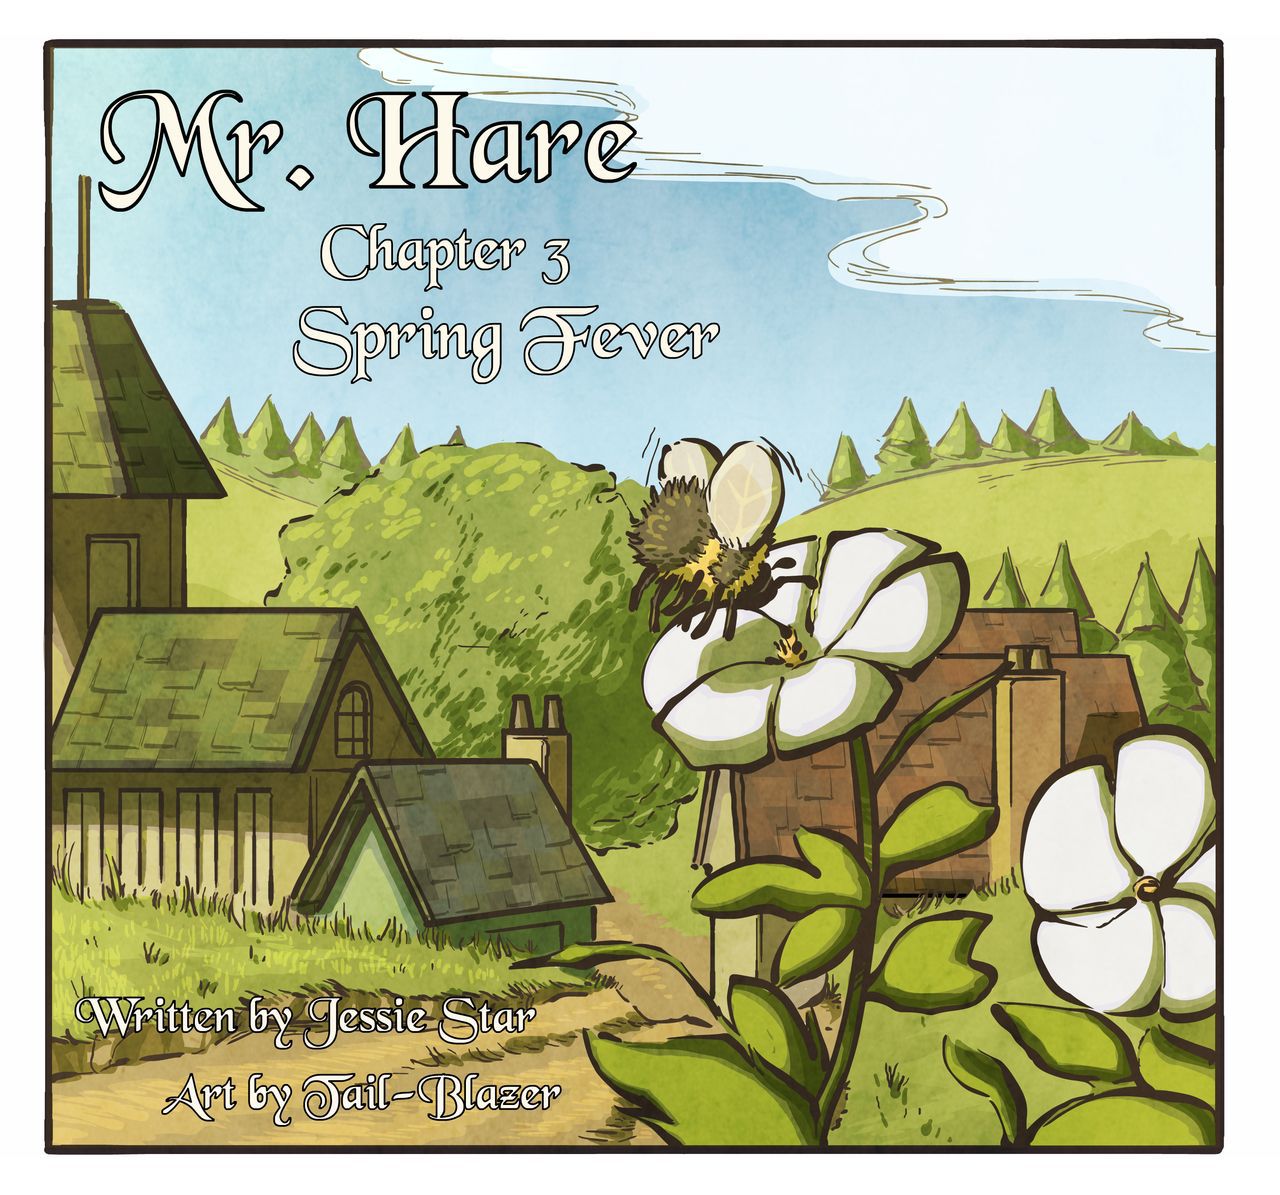 [Tail-Blazer] Mr. Hare (Ongoing) 83